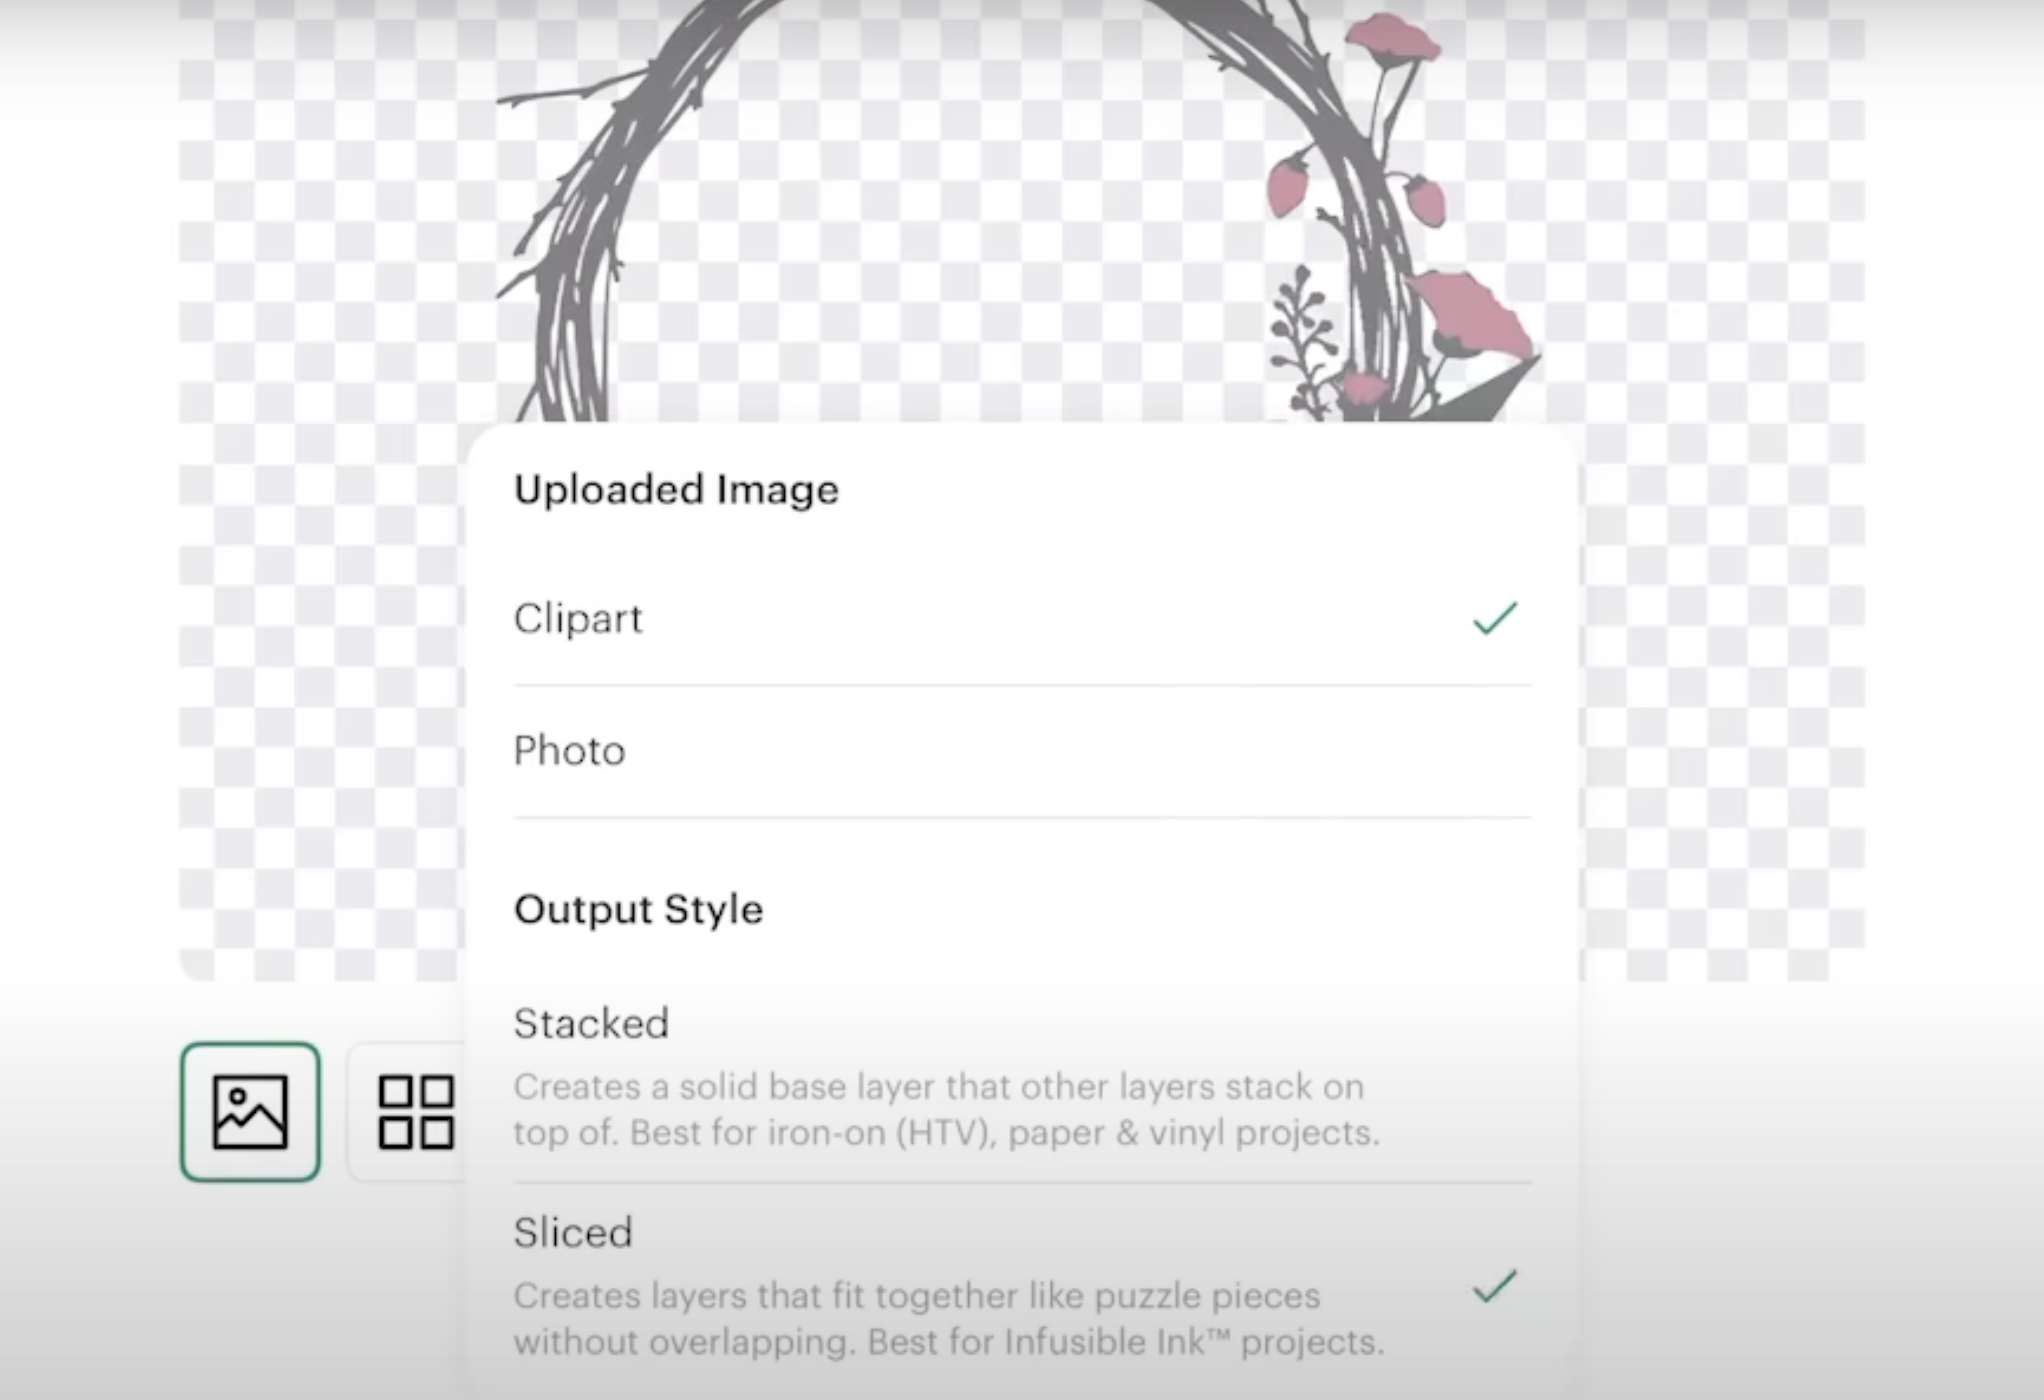 Select how you want the image uploaded.